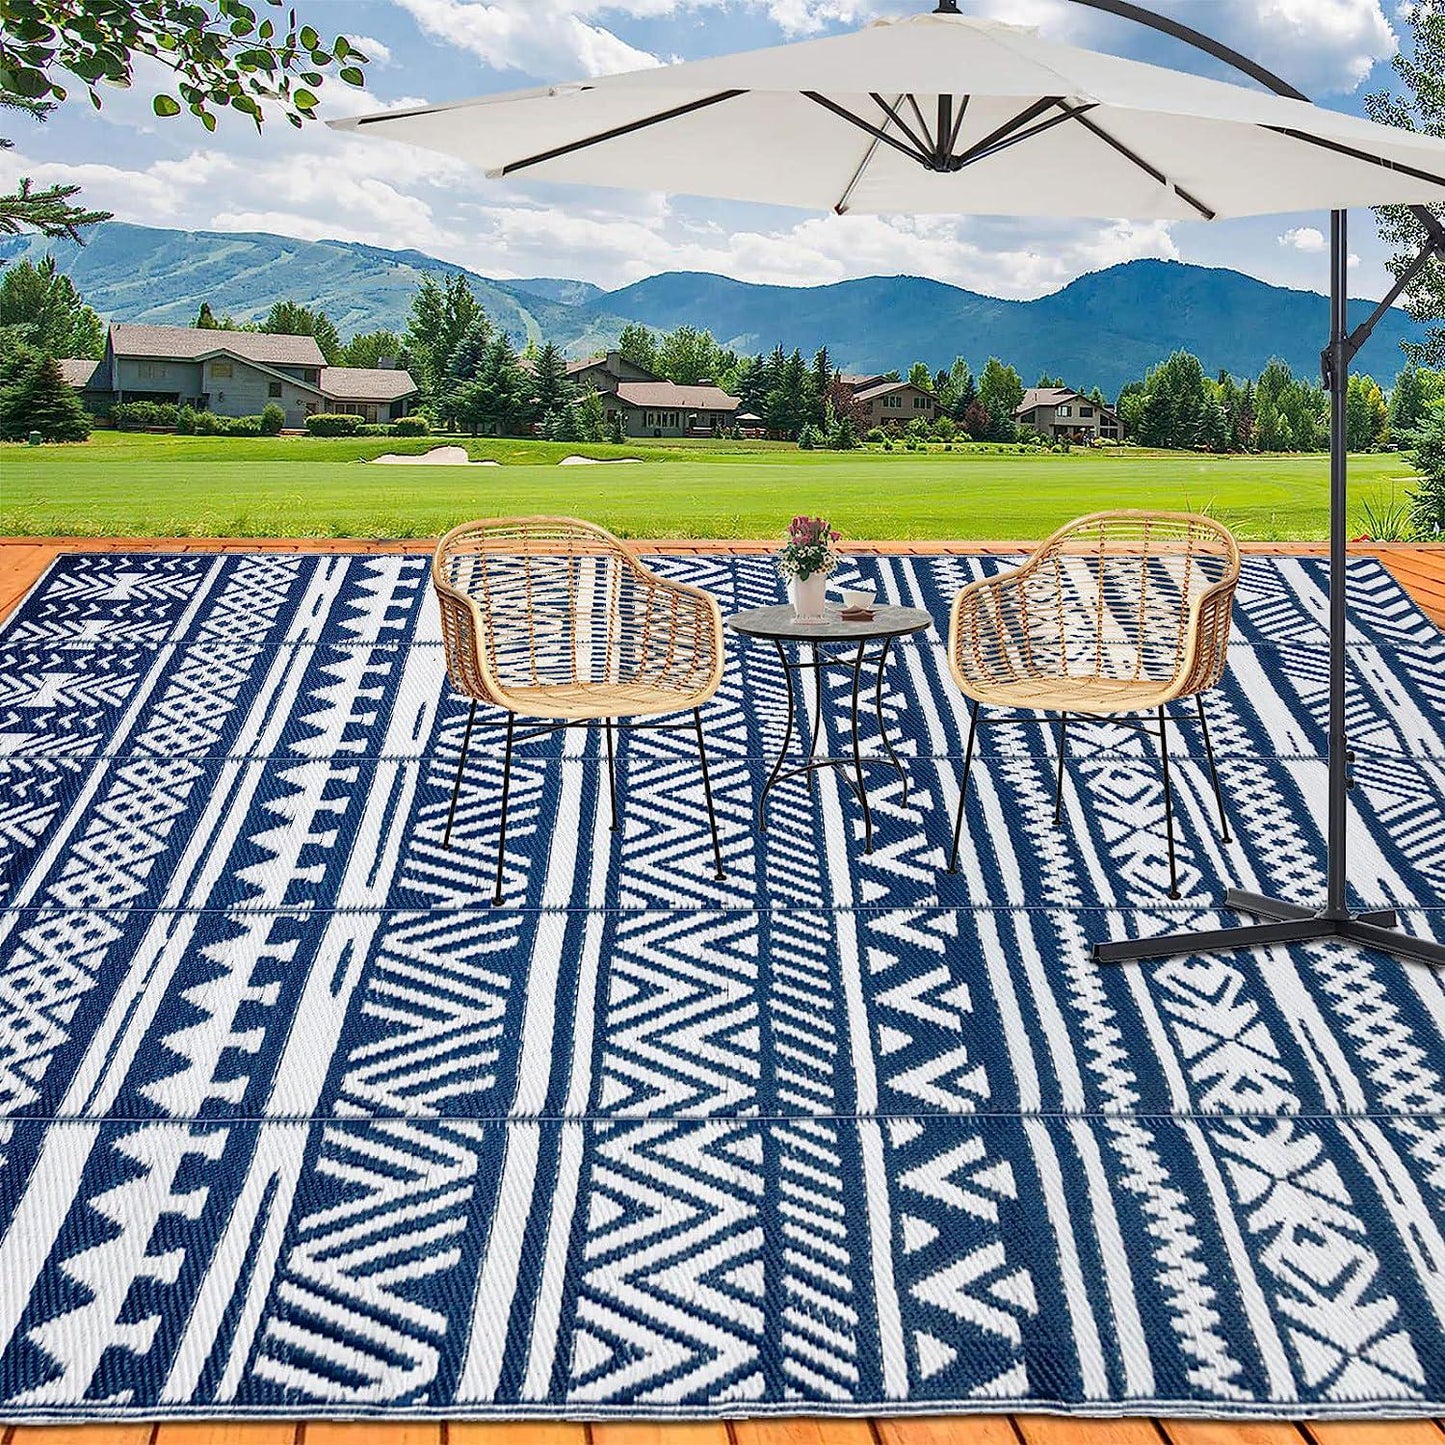 Reversible Outdoor Rug, Plastic Straw Patio Rugs RV Camping Rug Reversible Mats, Large Floor Mat and Rug Camping(Navy/White)